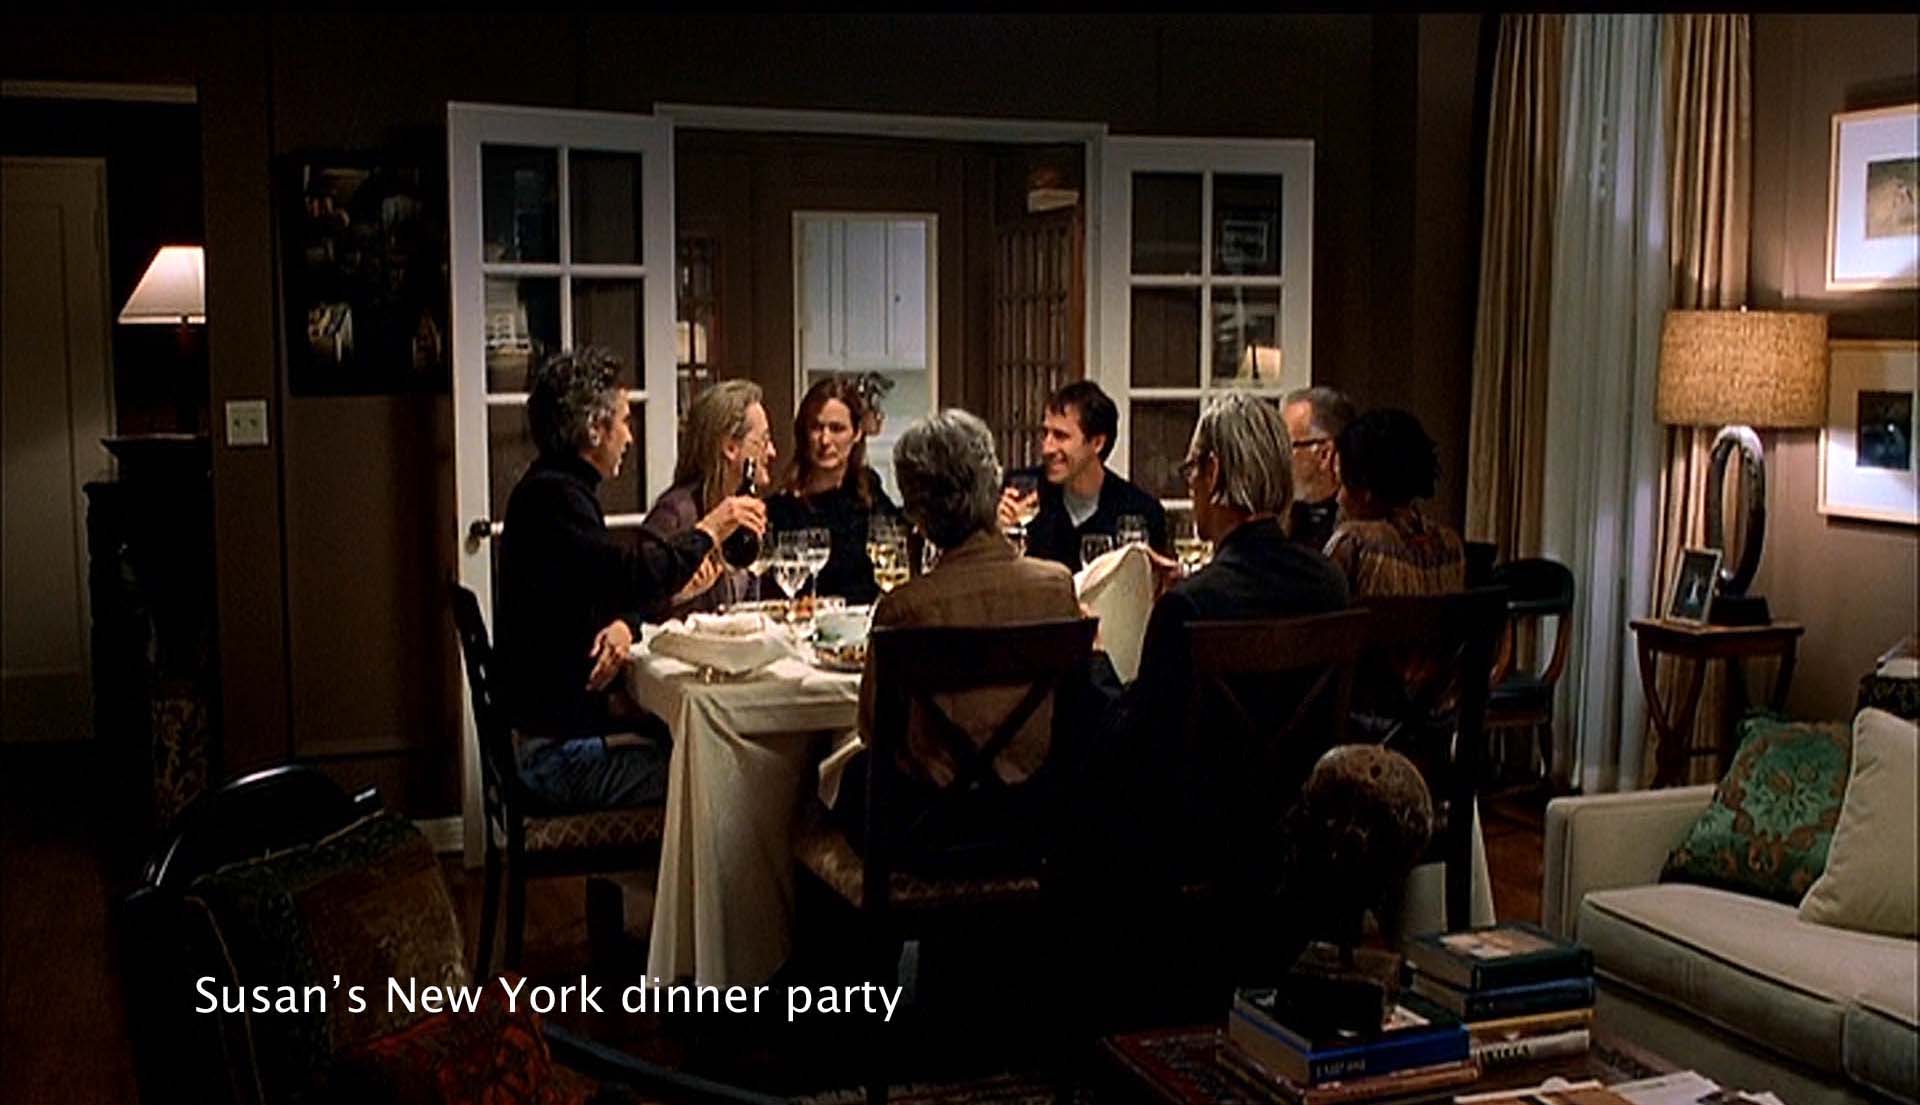 Susan's New York dinner party